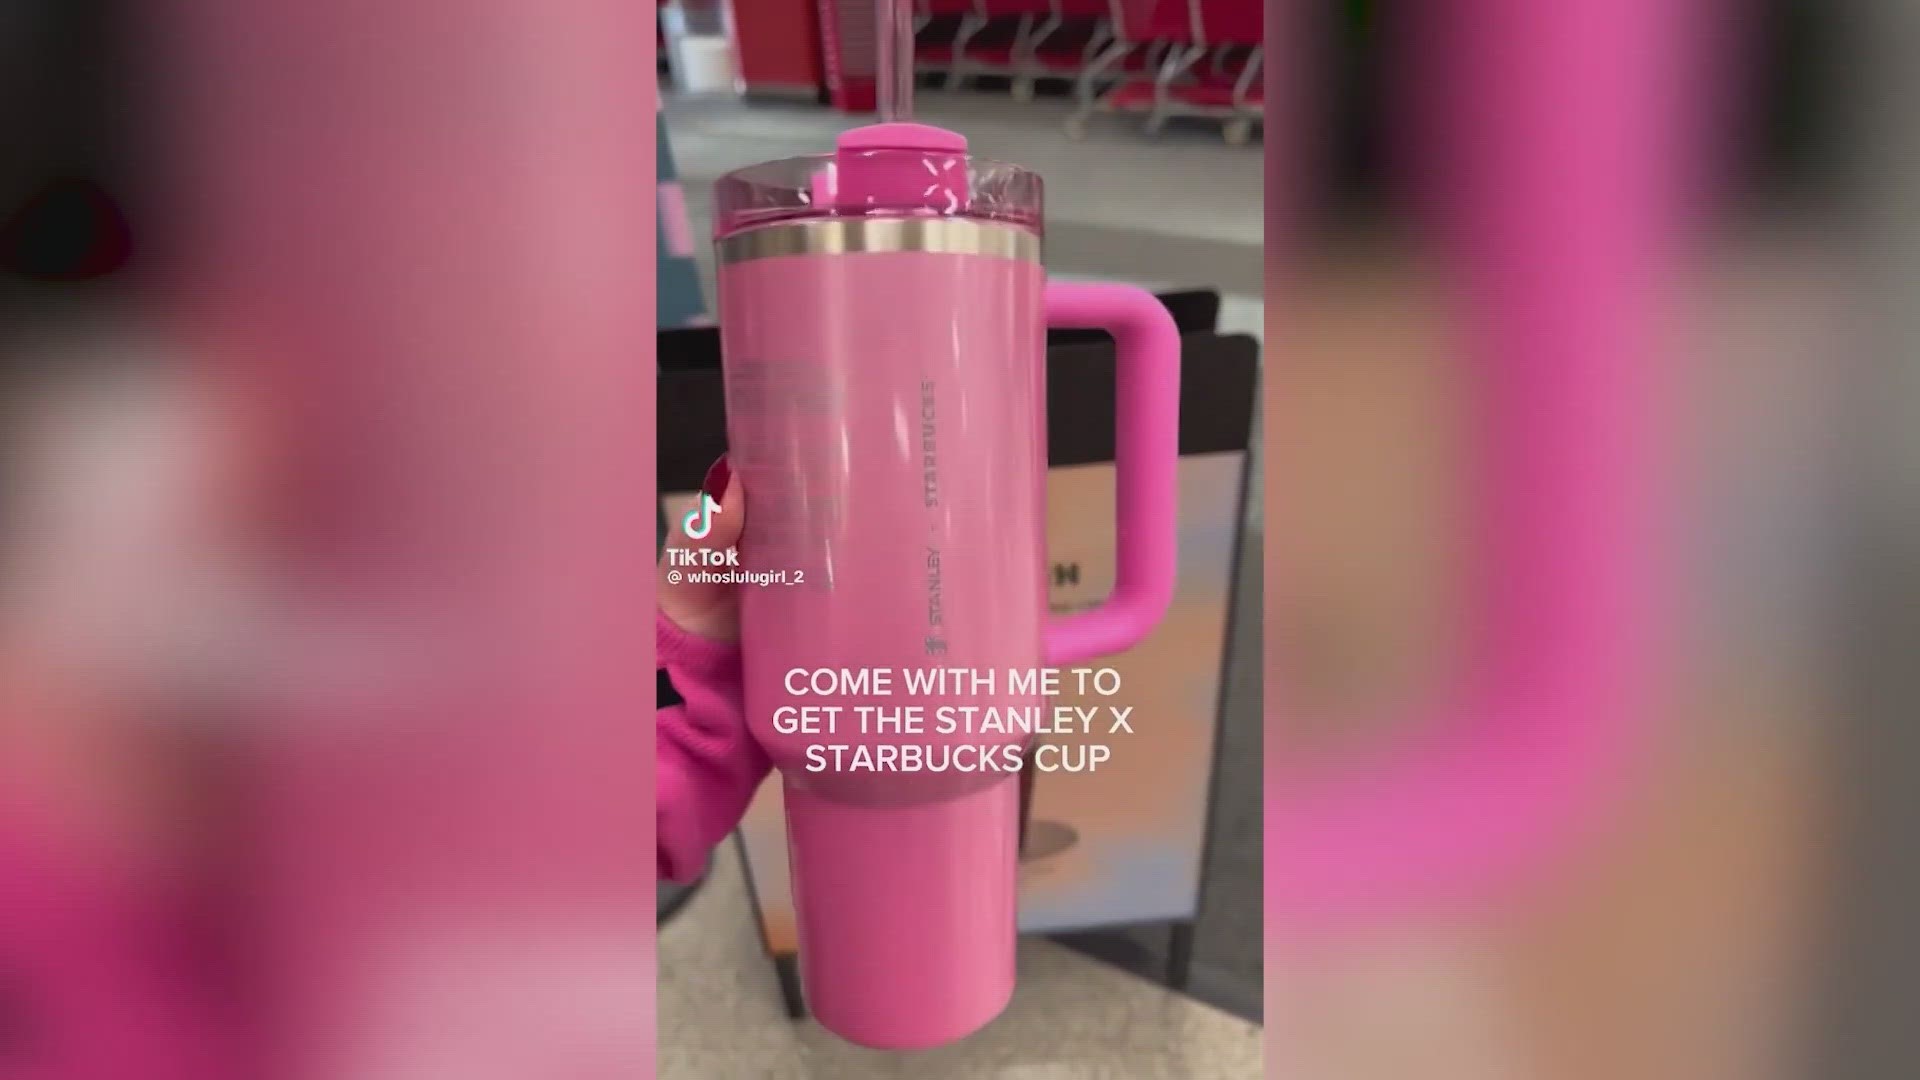 Videos showed fans lining up before stores opened for a shot at one of the limited-edition pink cups.